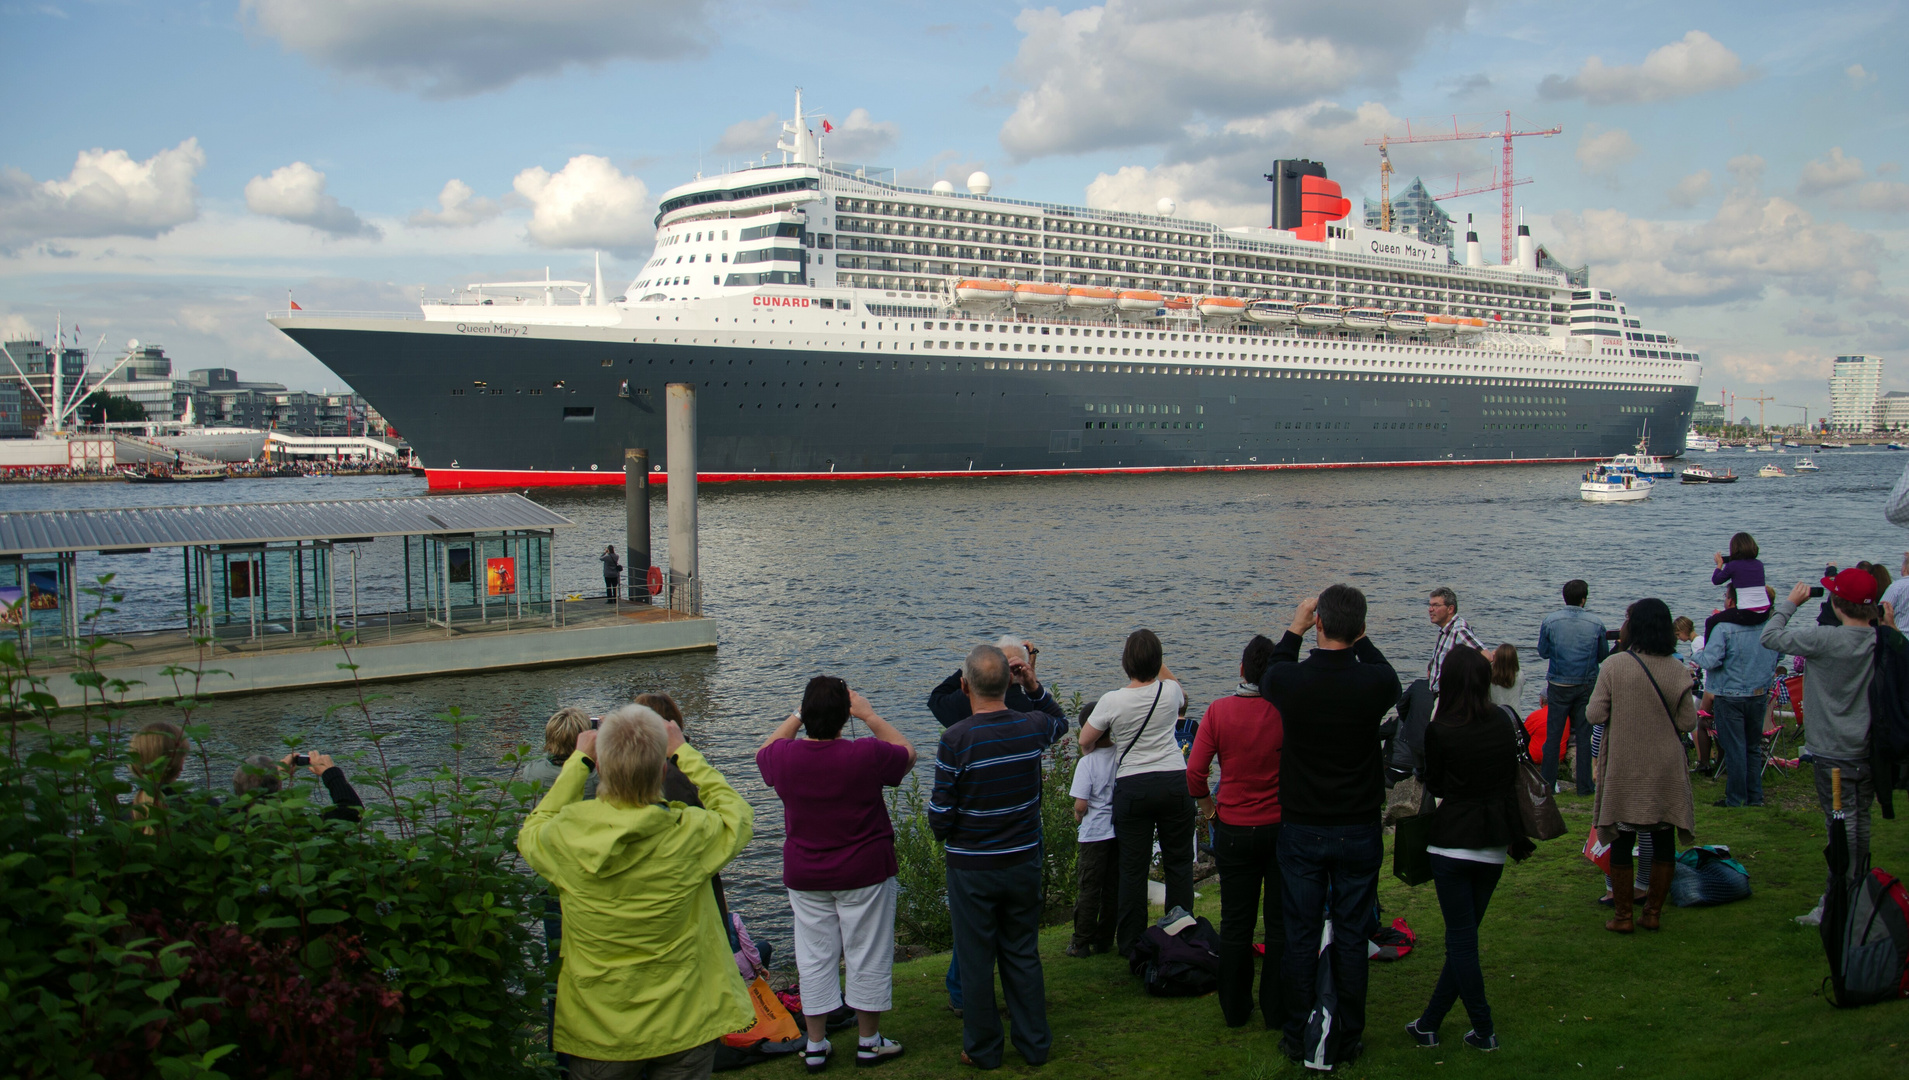 Queen Mary - the last visit 2011